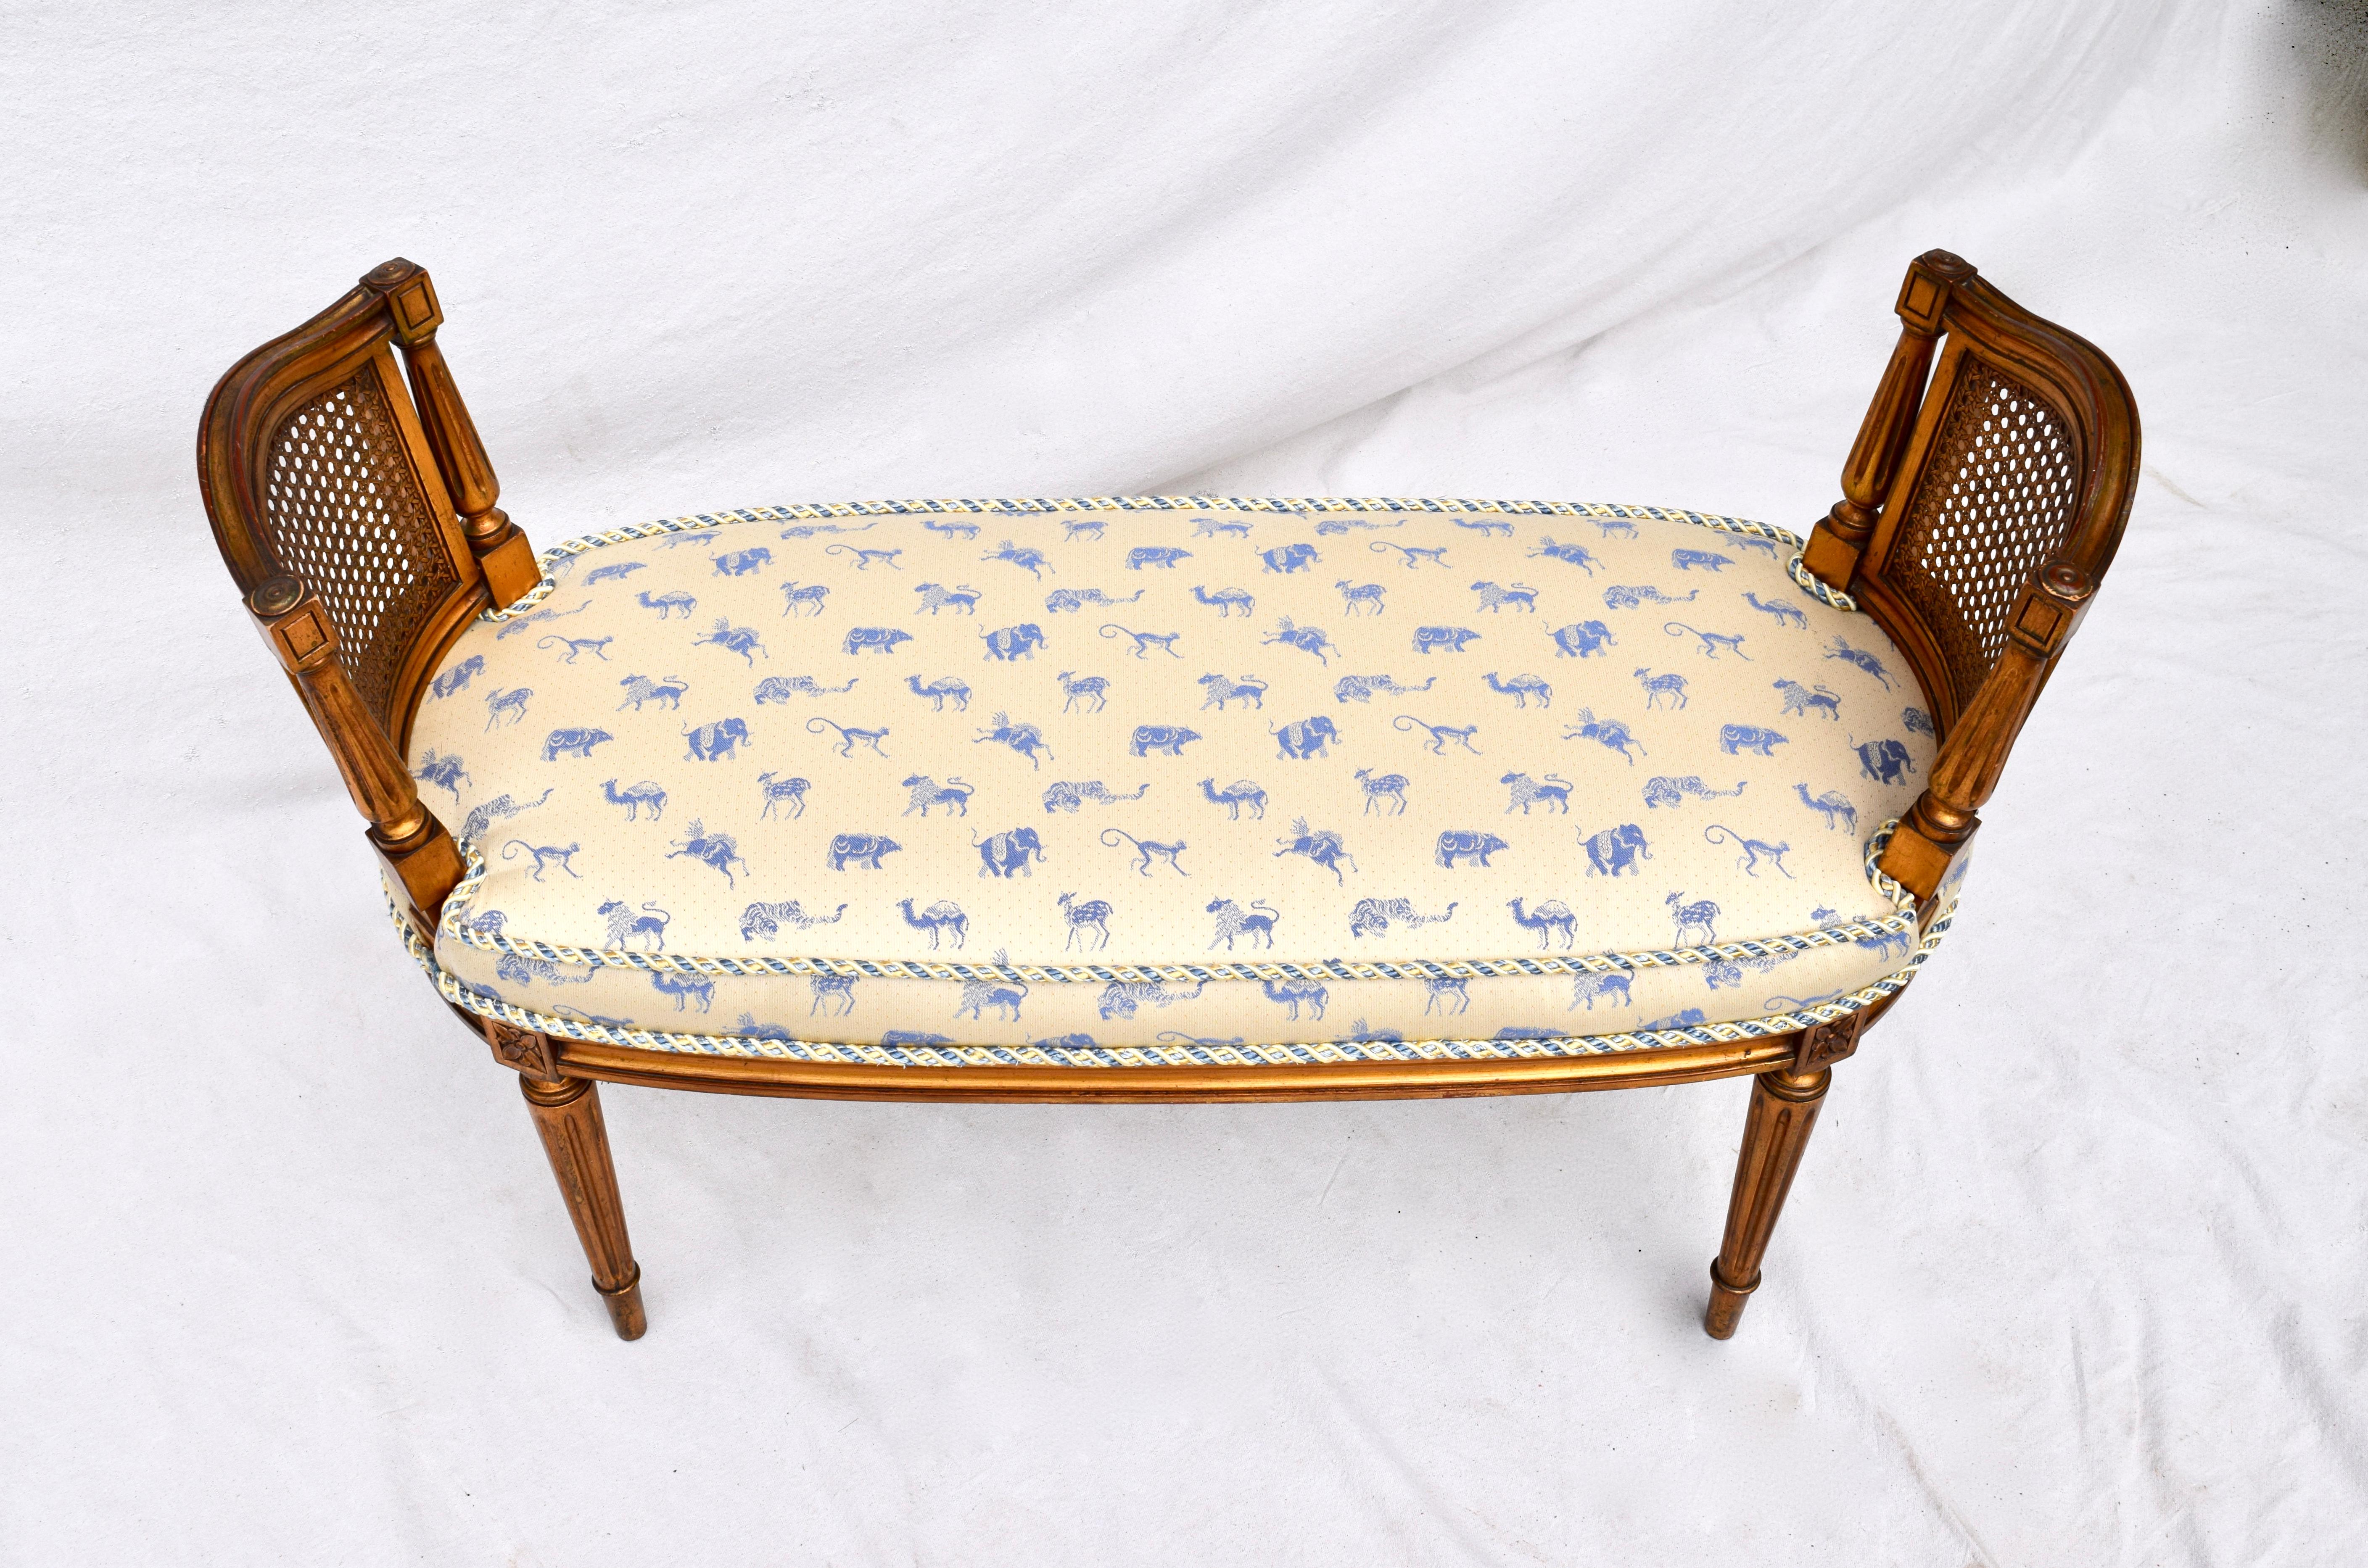 A decorative mid sized Louis XVI style cane and gilt window bench with attached cushion upholstered in exotic animals cotton fabric. Distinct features include curved caned sides and seat accented with complimenting thick rope cording. Lovely patina.